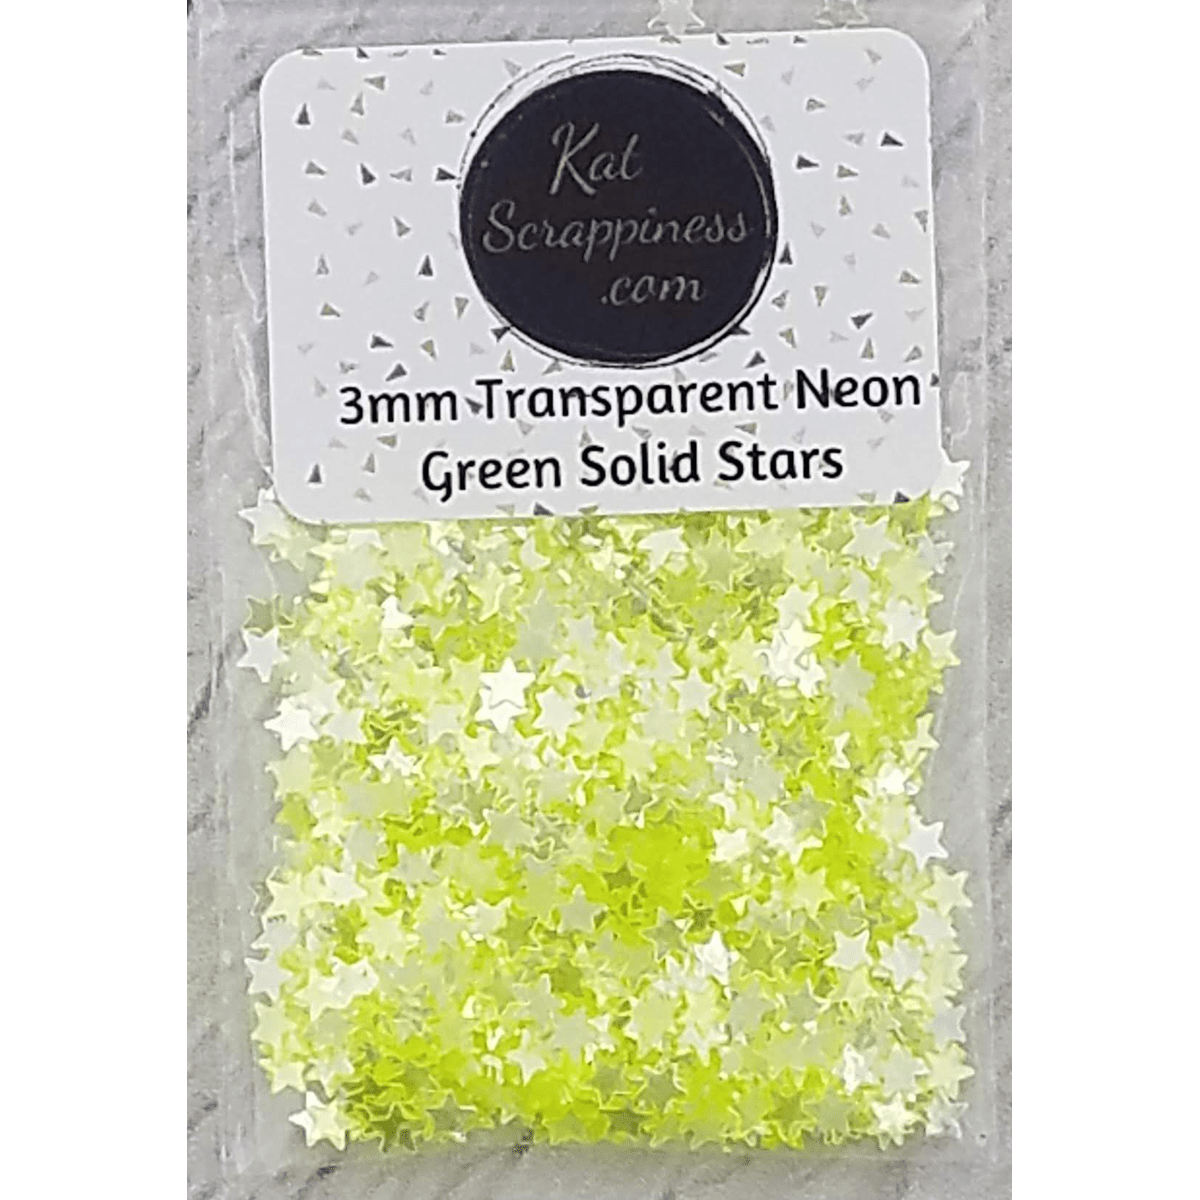 3mm Transparent Neon Green Solid Star Sequins - Kat Scrappiness